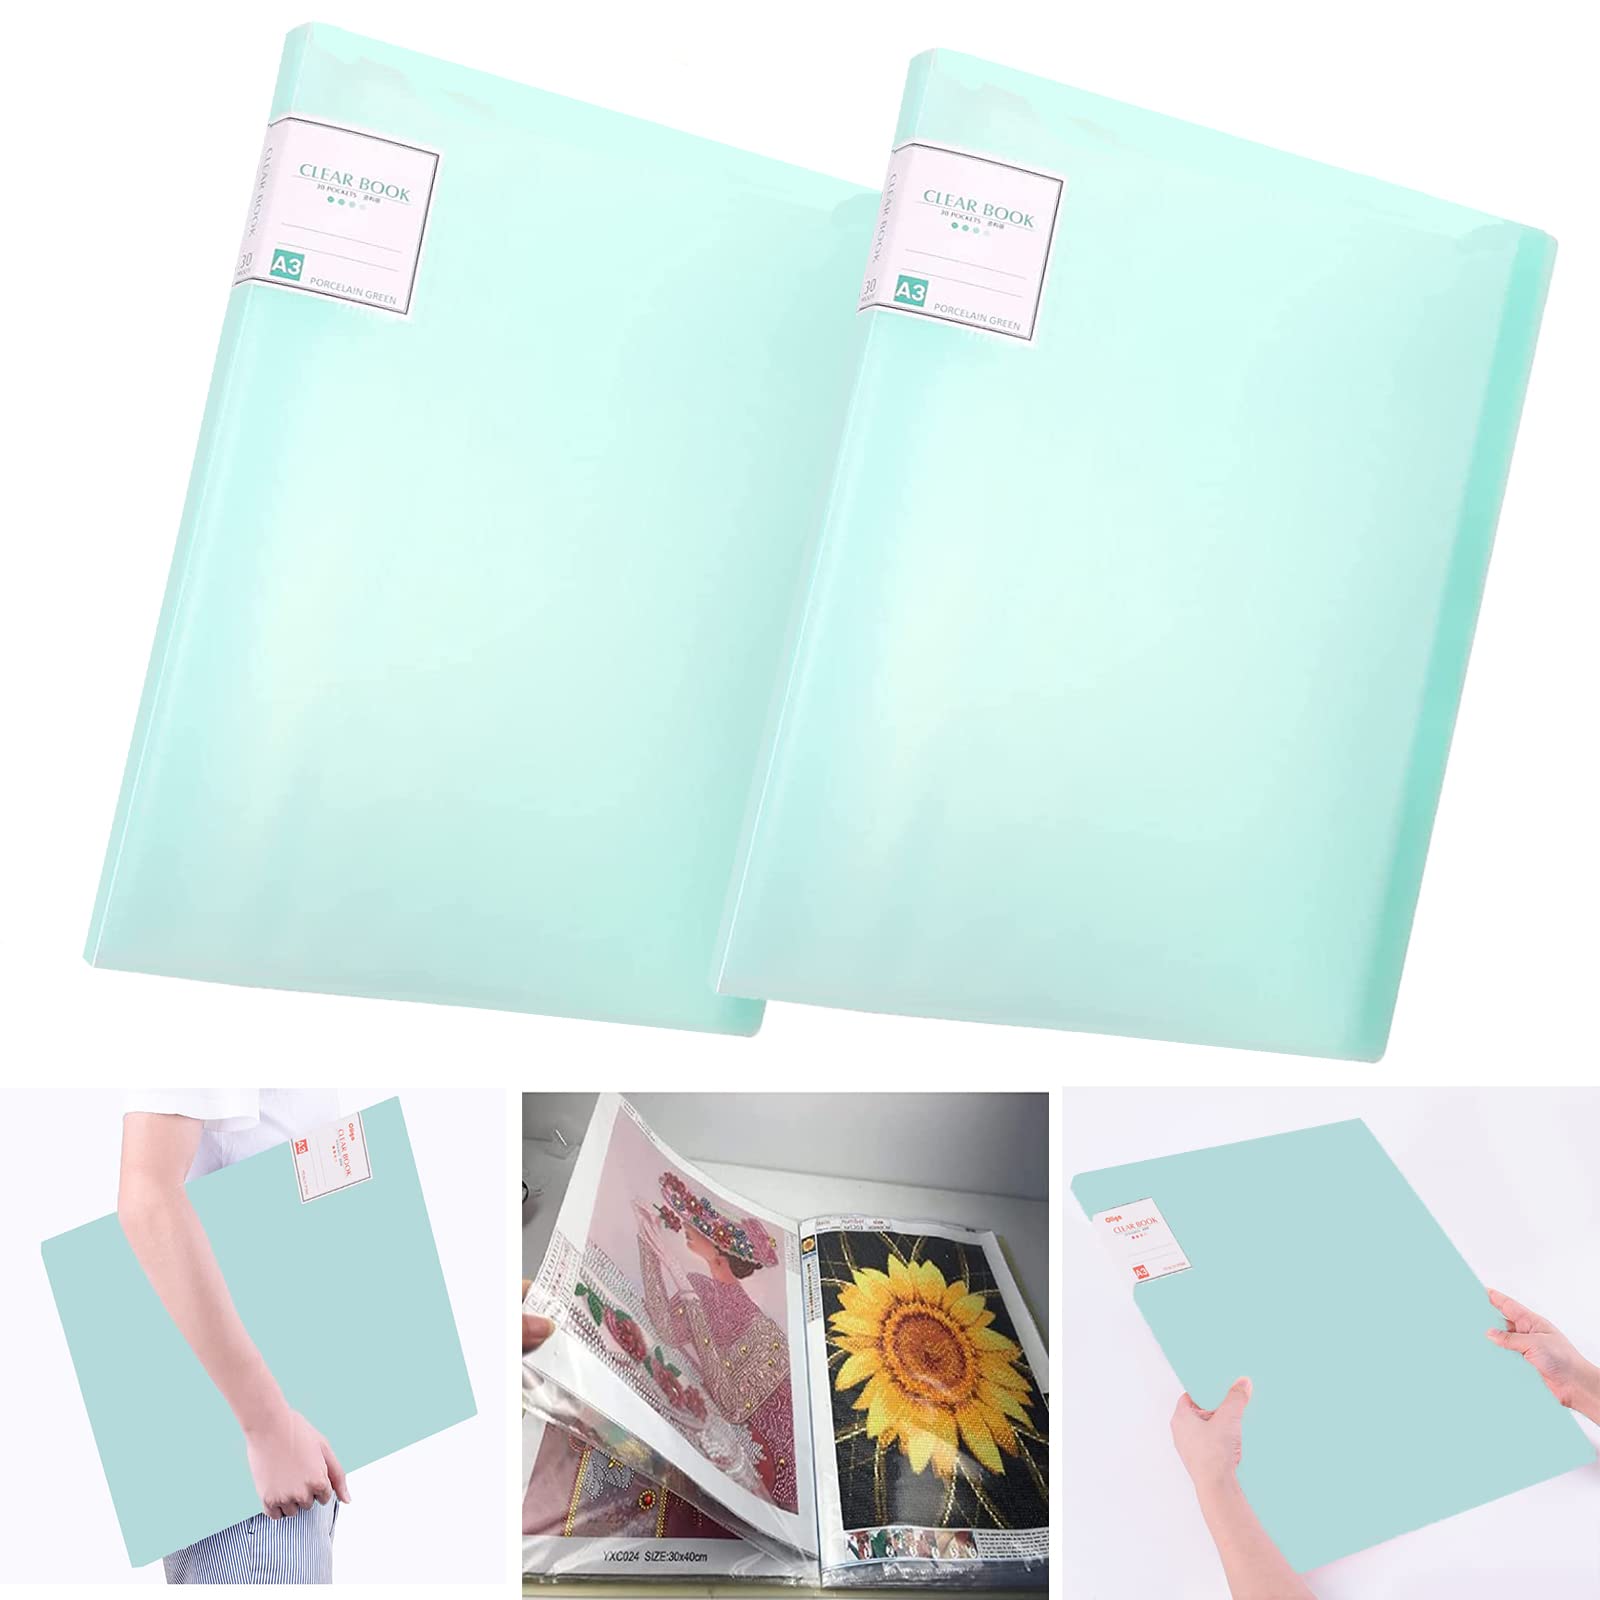 Qunrwe A3 Art Portfolios Case 60 Pages,Diamond Painting Storage Book,Pocket  Protector with Index Stickers,Clear Sheet Protectors Portfolio Folder for